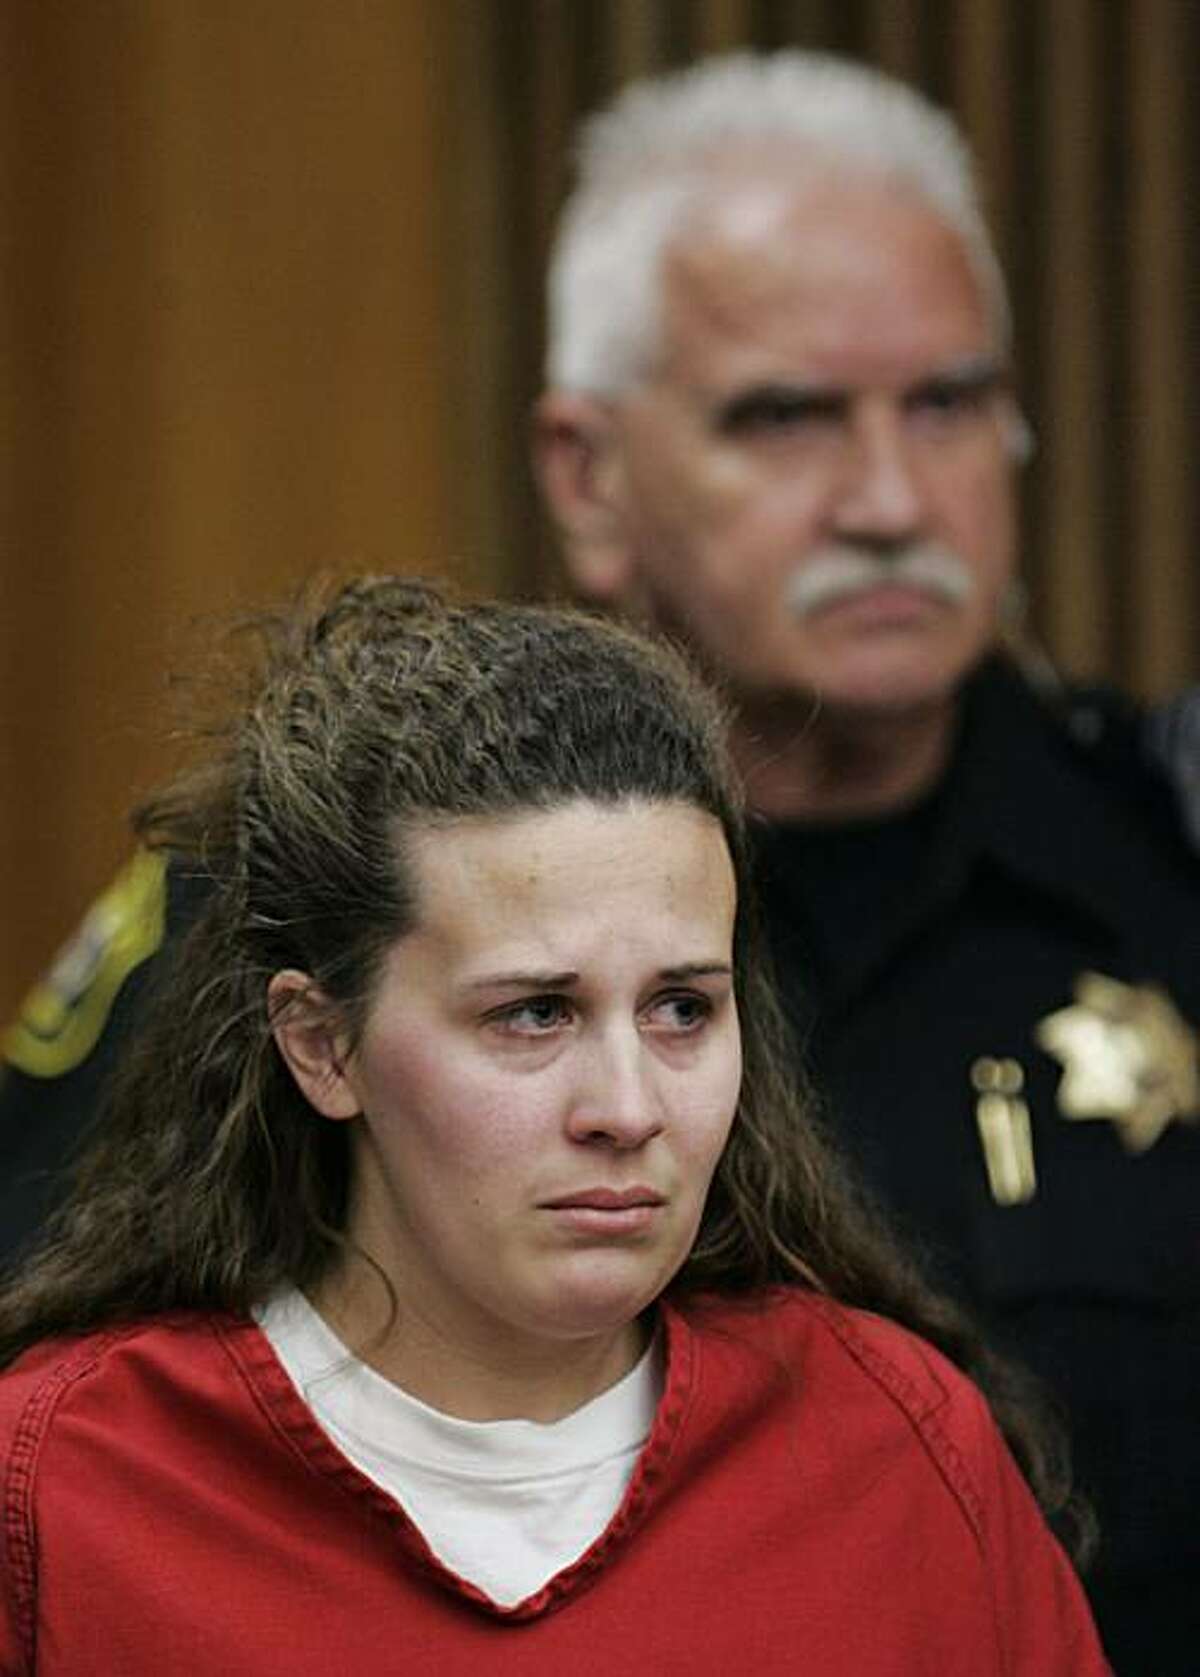 In this April 14, 2009 file photo, Melissa Huckaby, 28, listens in a Stockton, Calif., courtroom during her arraignment. Huckaby, accused of kidnapping, raping and killing 8-year-old Sandra Cantu, then stuffing the body in a suitcase, pleaded guilty Monday, May 10, 2010, to to a charge of first-degree murder with a special circumstance of kidnapping. As part of a deal with prosecutors, all other charges including two involving rape and lewd or lascivious conduct with a child under 14 were dropped,according to court spokeswoman Sharon Morris.